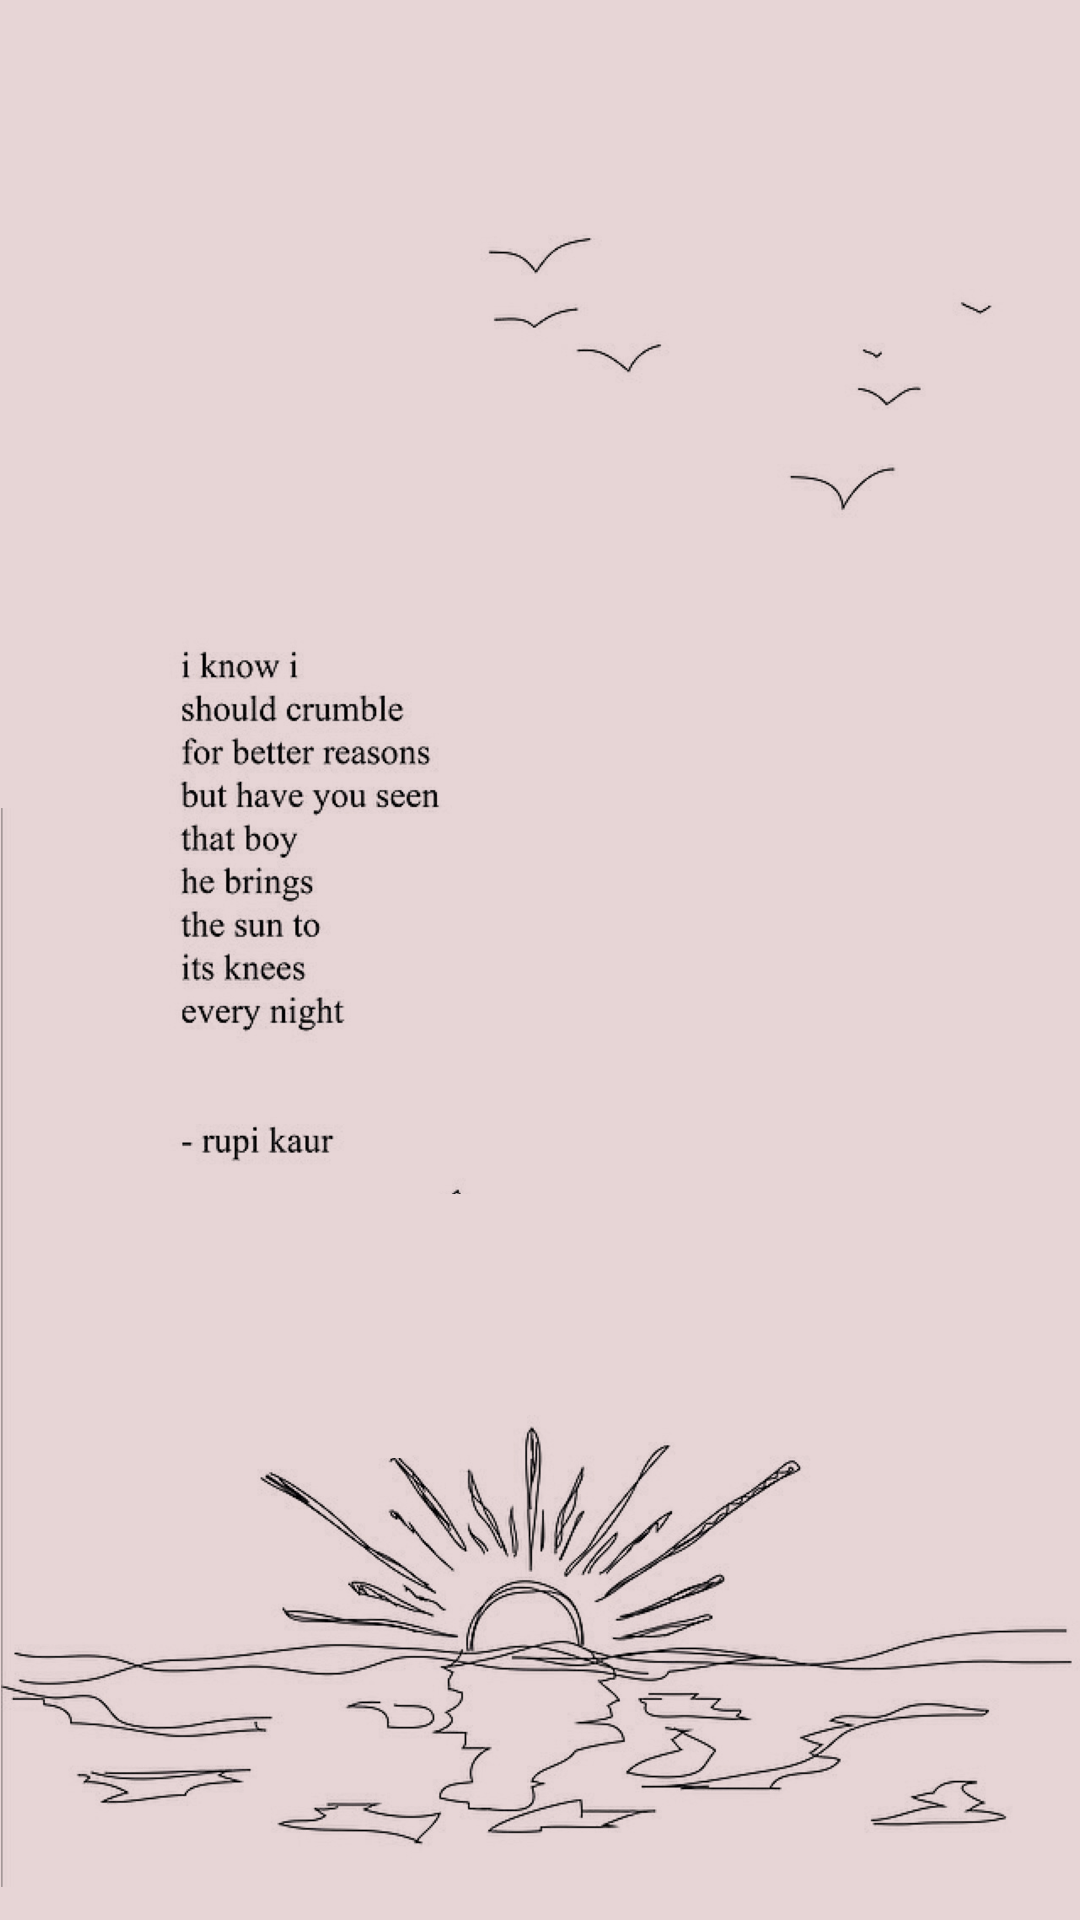 quotes. Wallpaper quotes, Aesthetic words, Rupi kaur quotes